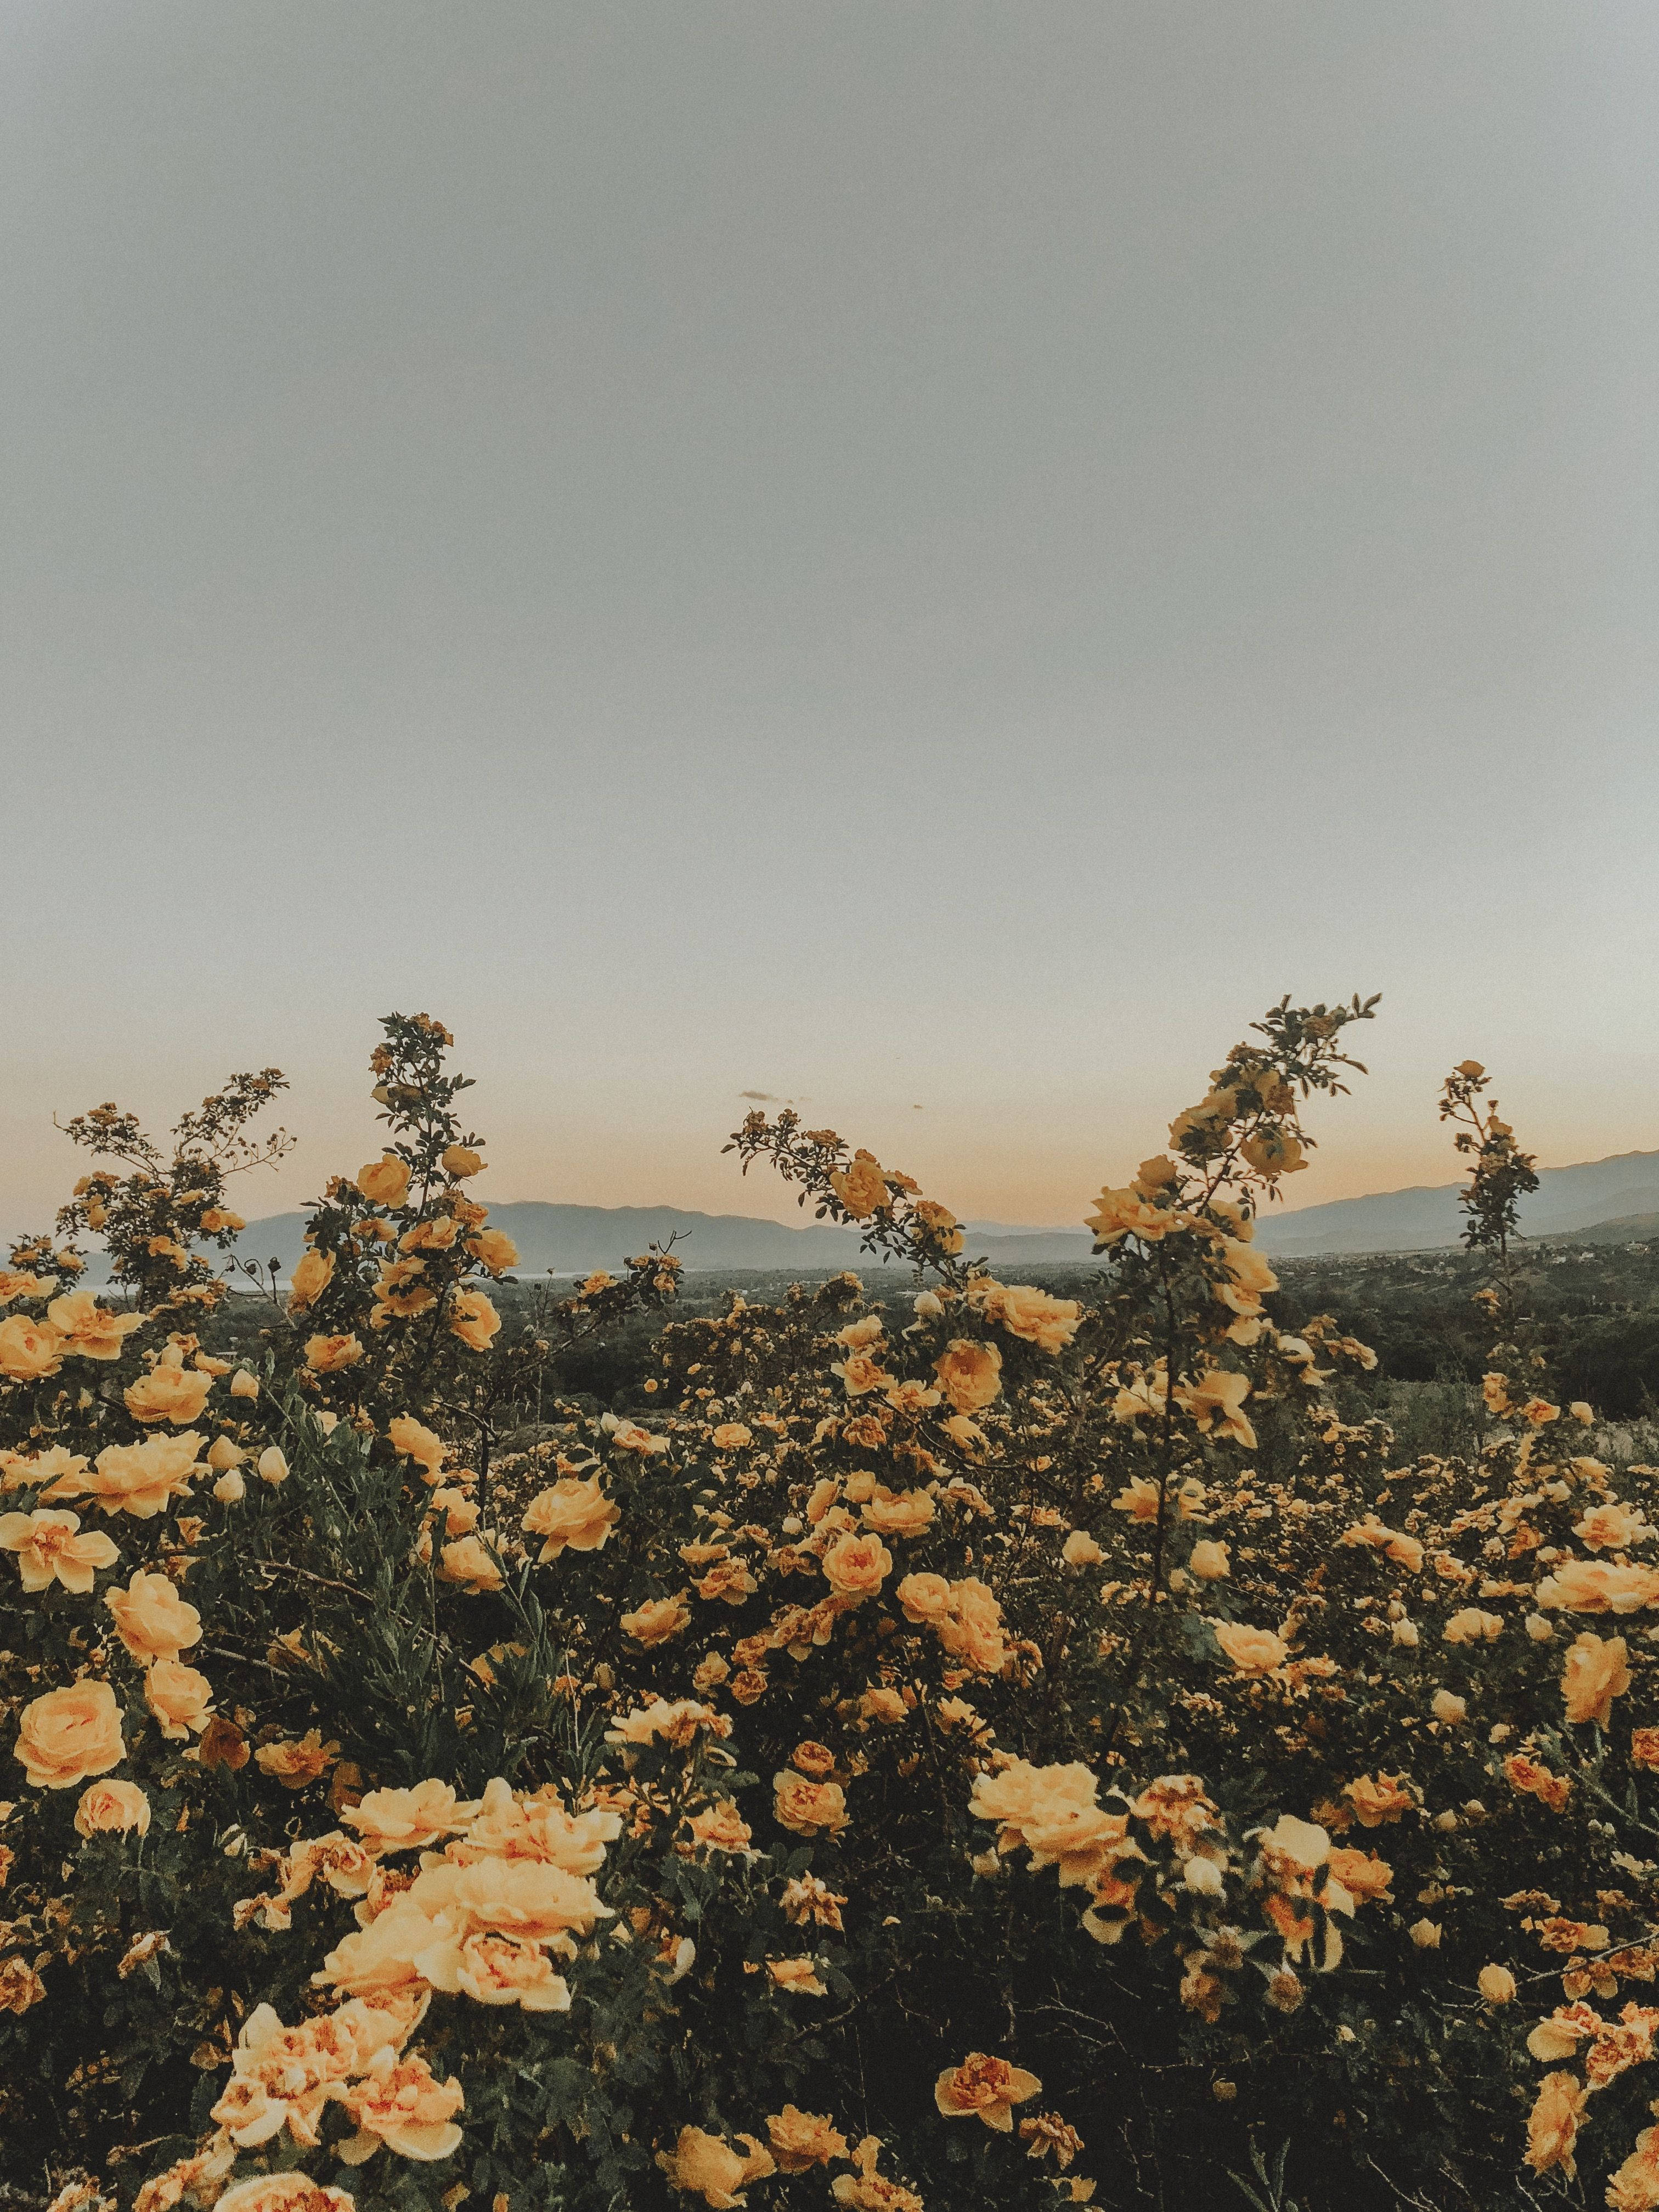 A field of flowers with mountains in the background - Summer